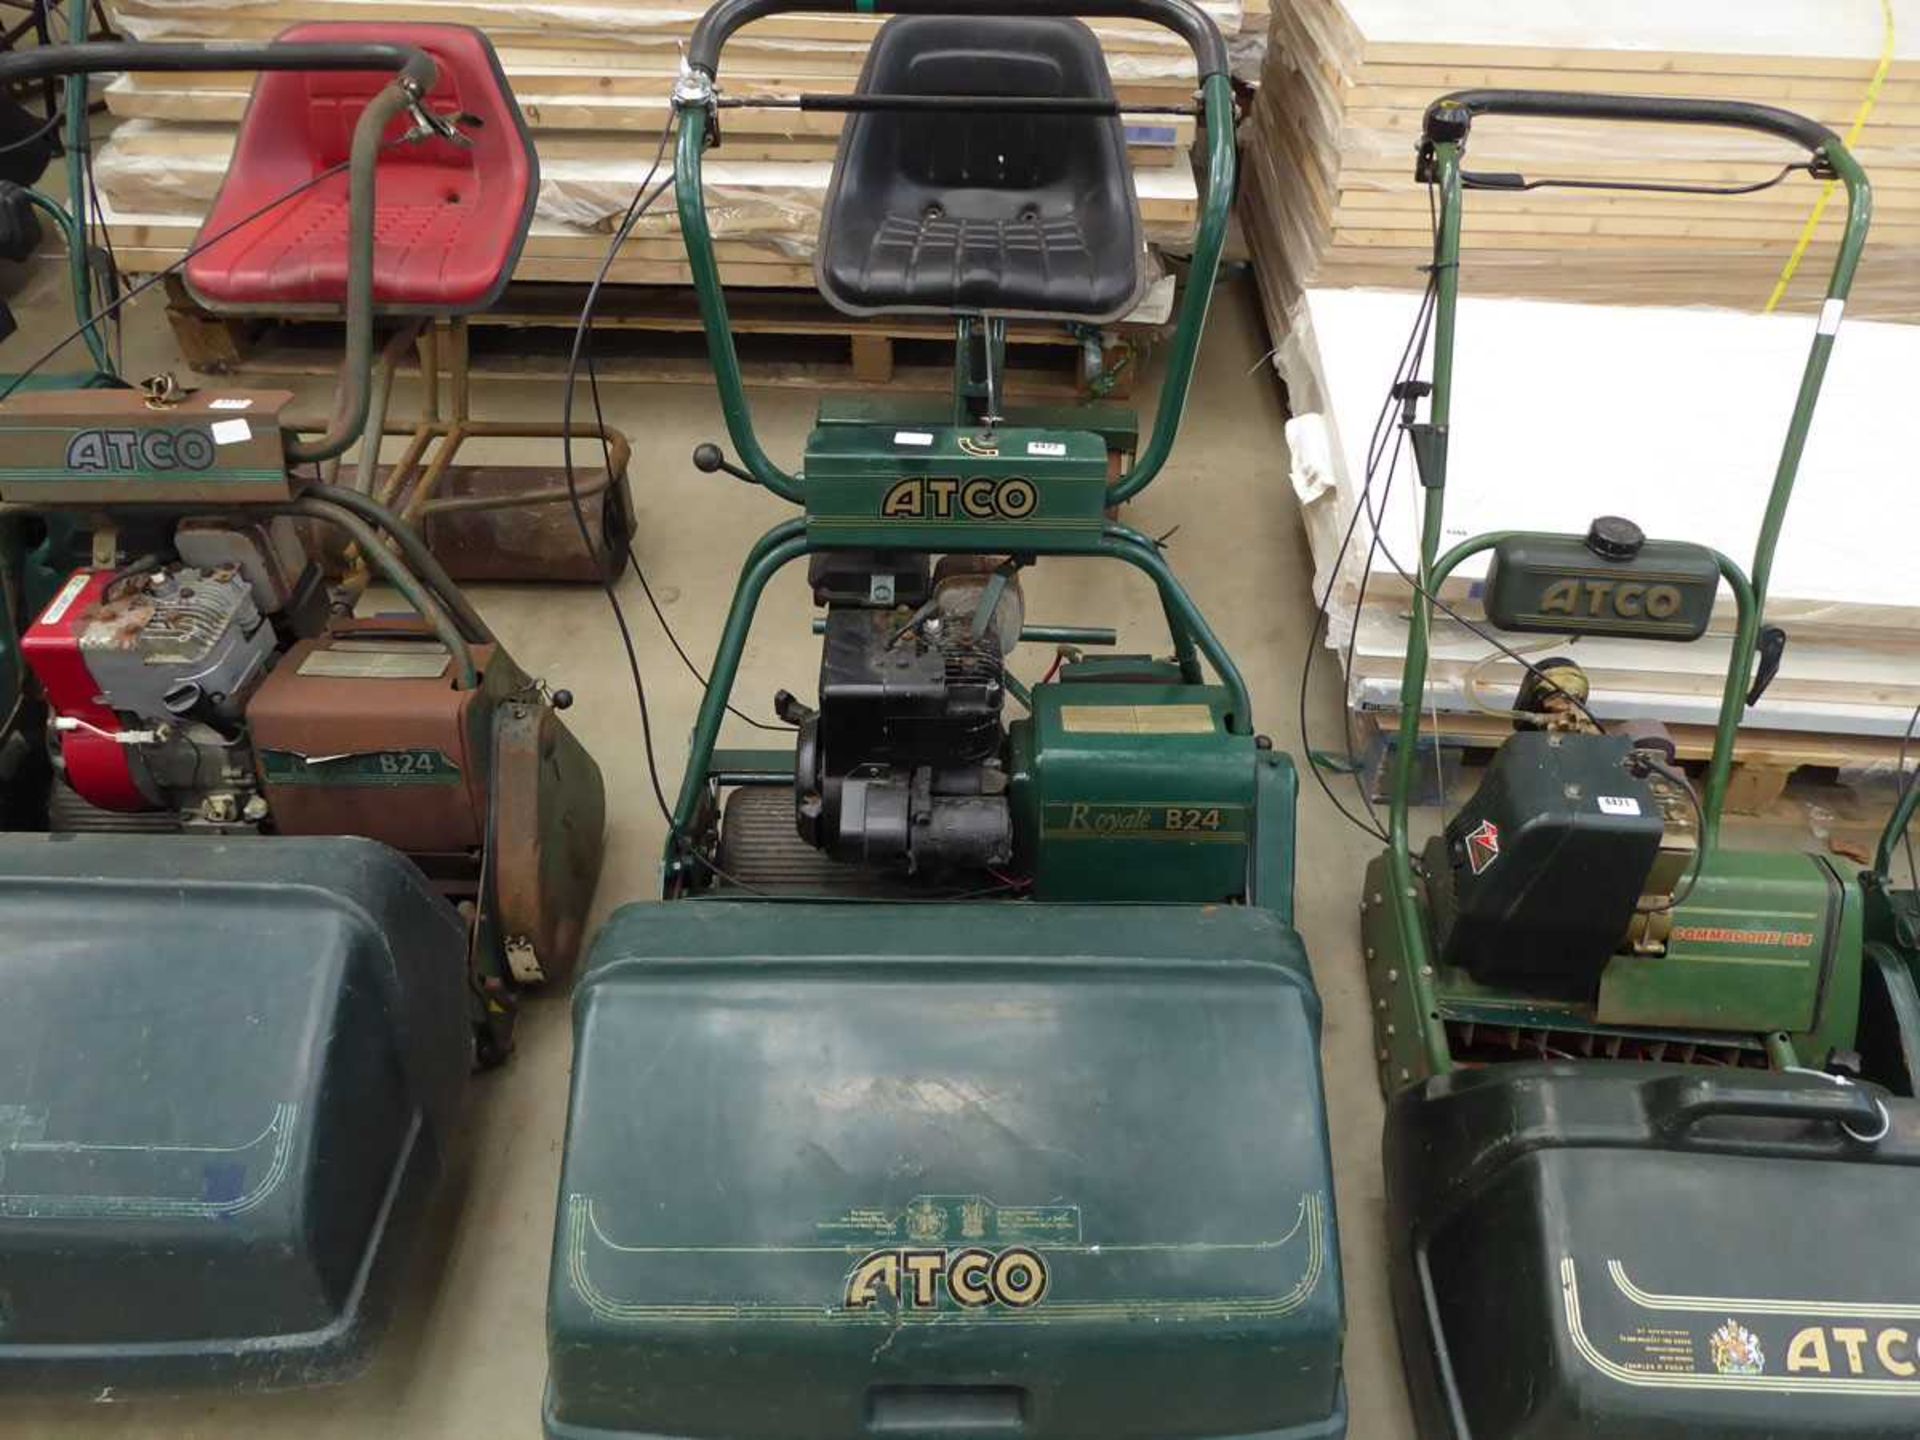 Atco Royal B24 petrol powered cylinder mower with rear roller and seat